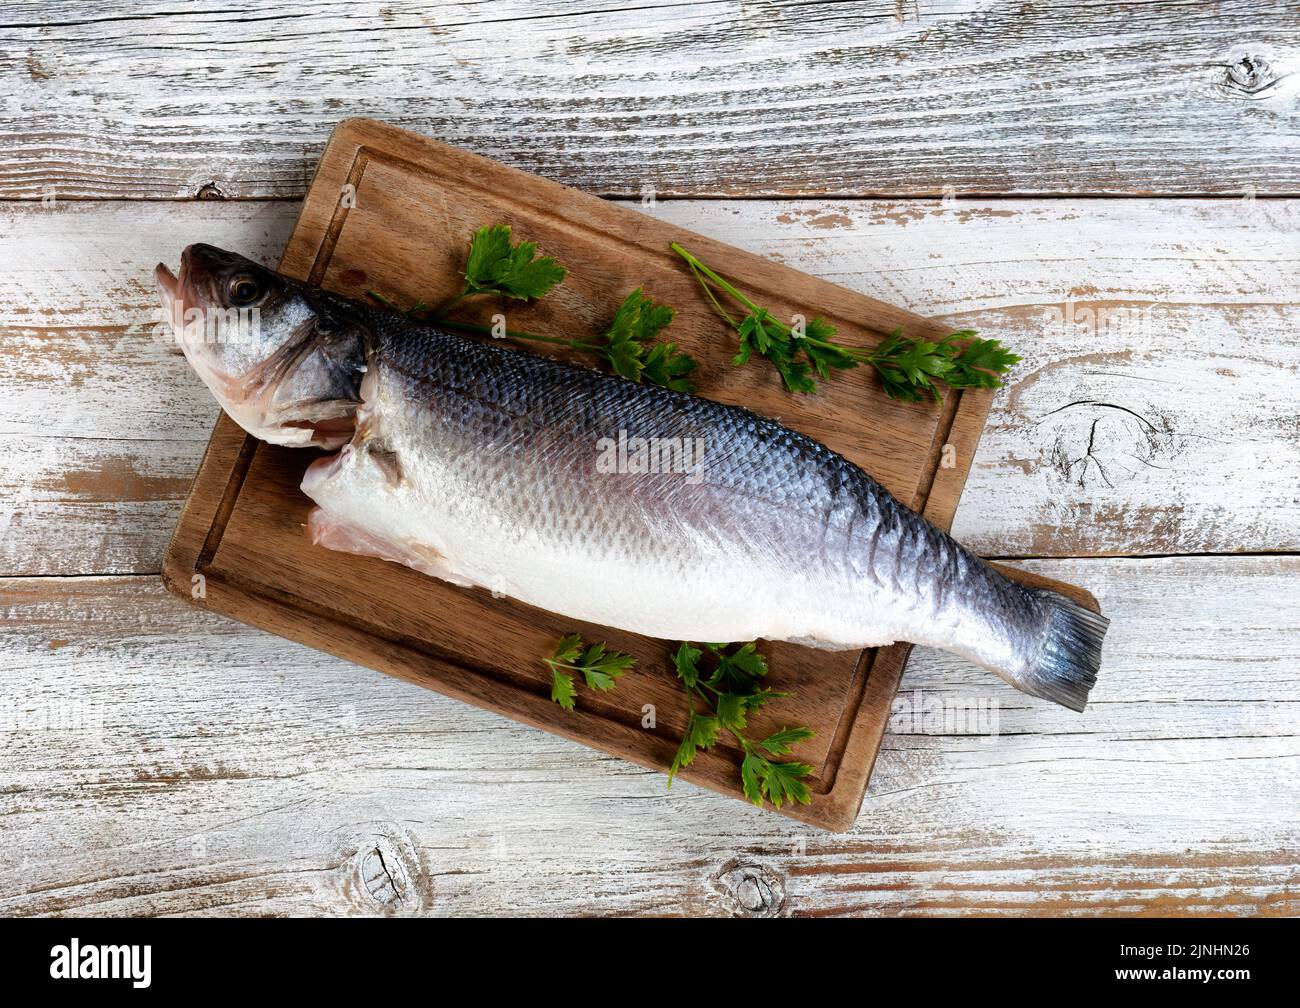 Freshly cleaned seafood seabass fish on wood board with parsley herbs on side Stock Photo